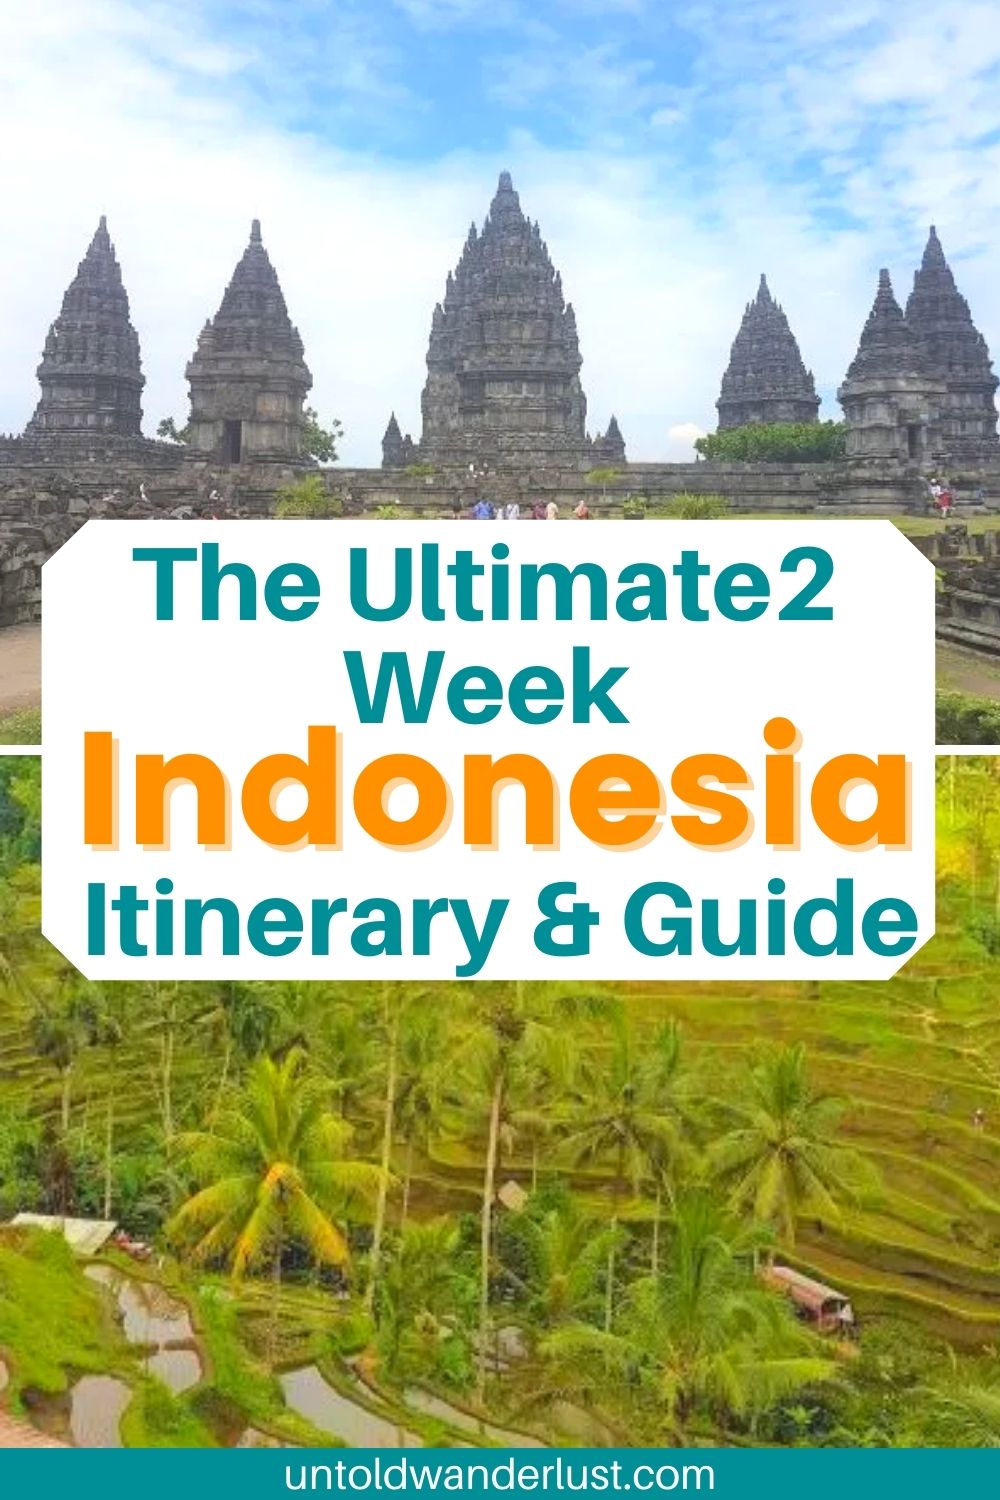 The Best 2 Week Indonesia Itinerary